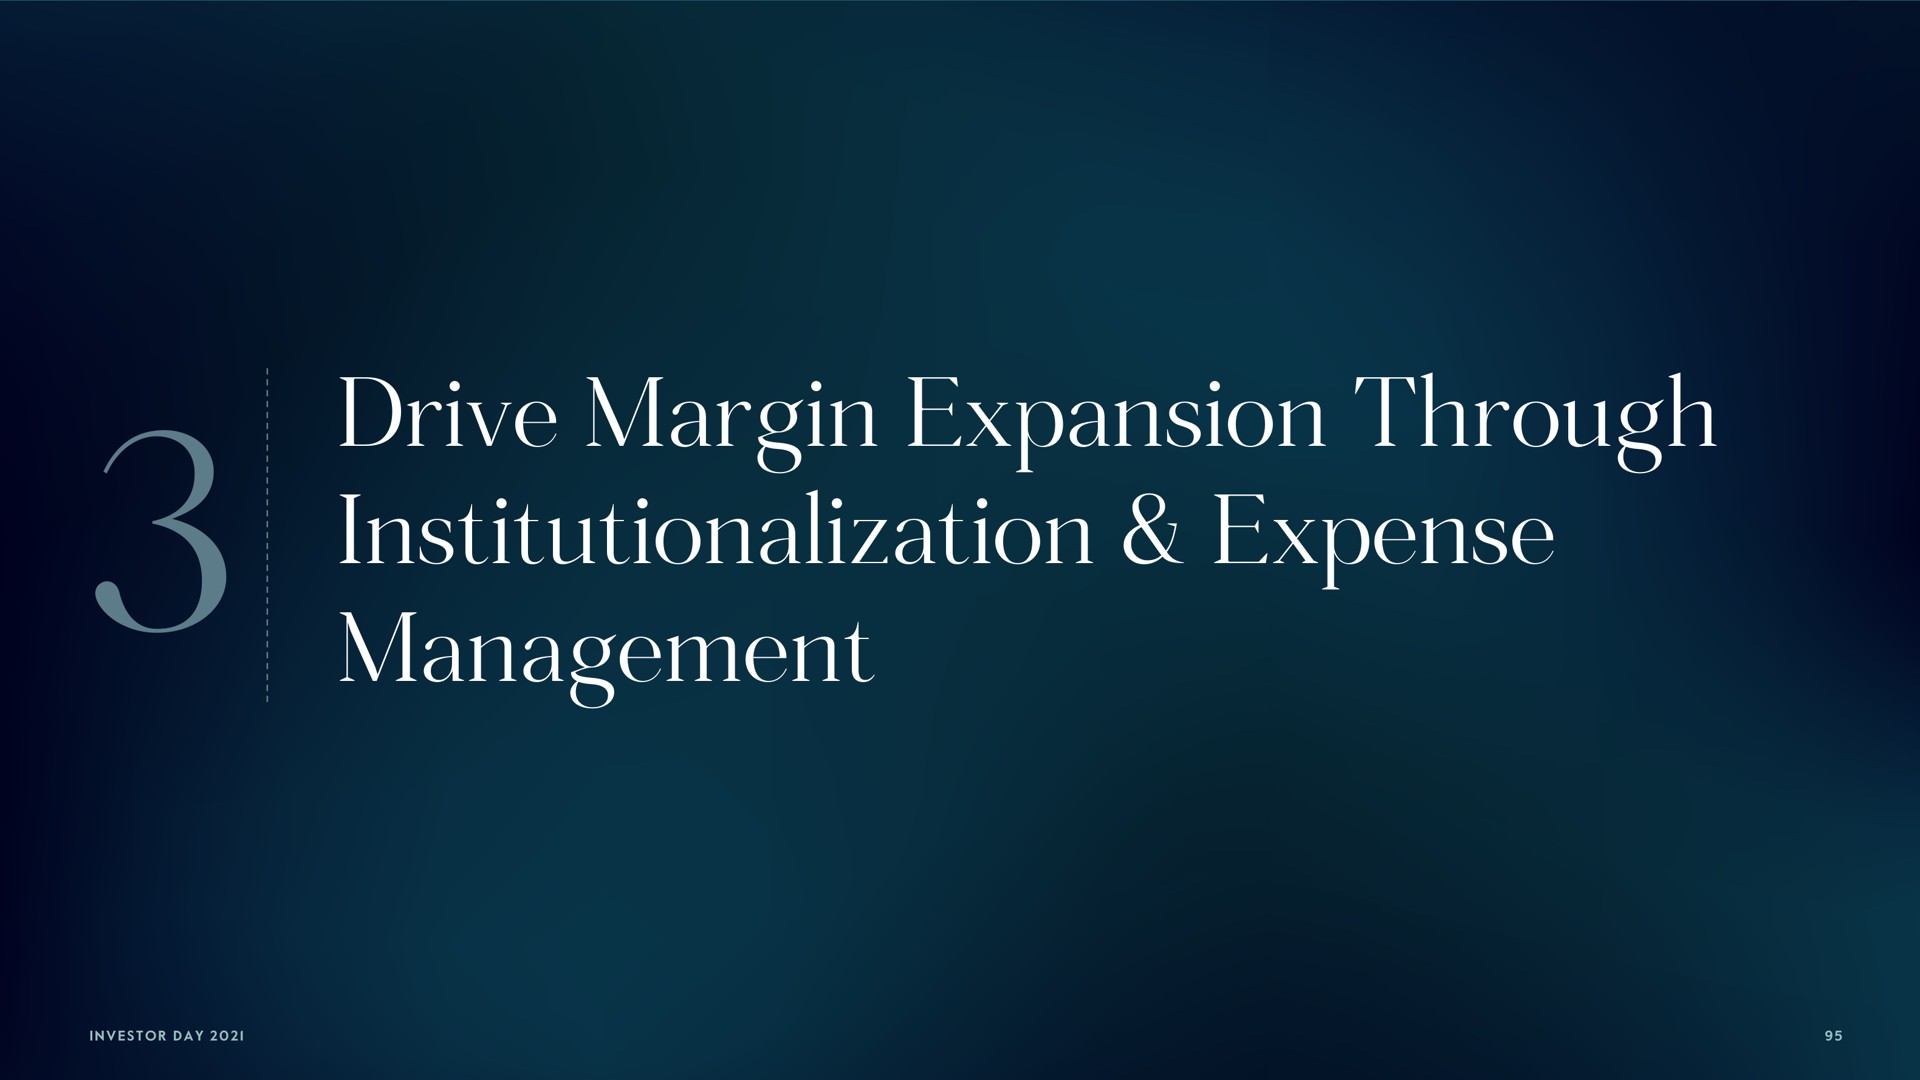 drive margin expansion through institutionalization expense management | Carlyle